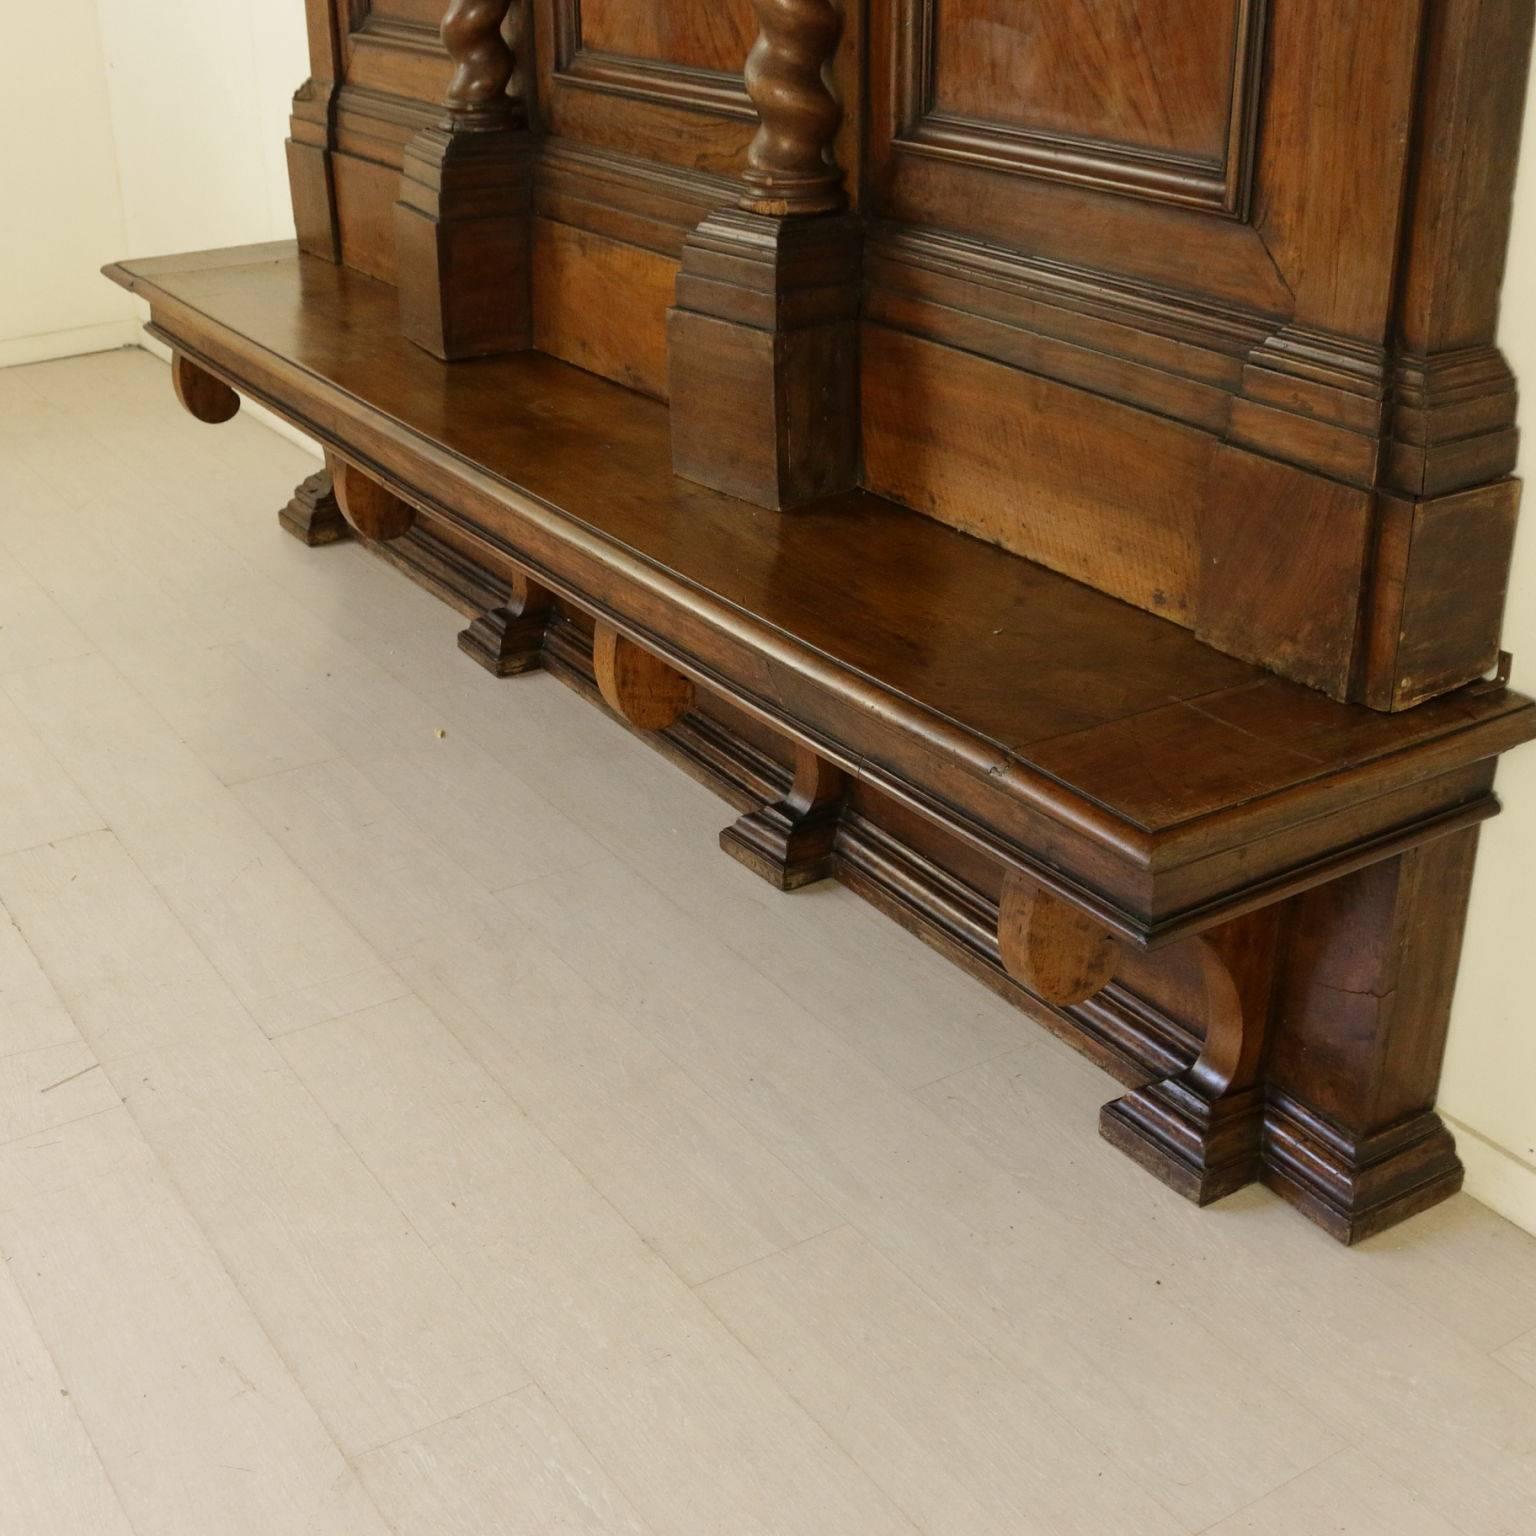 Three-Seat Monk Bench Manufactured in Italy, 18th Century 1